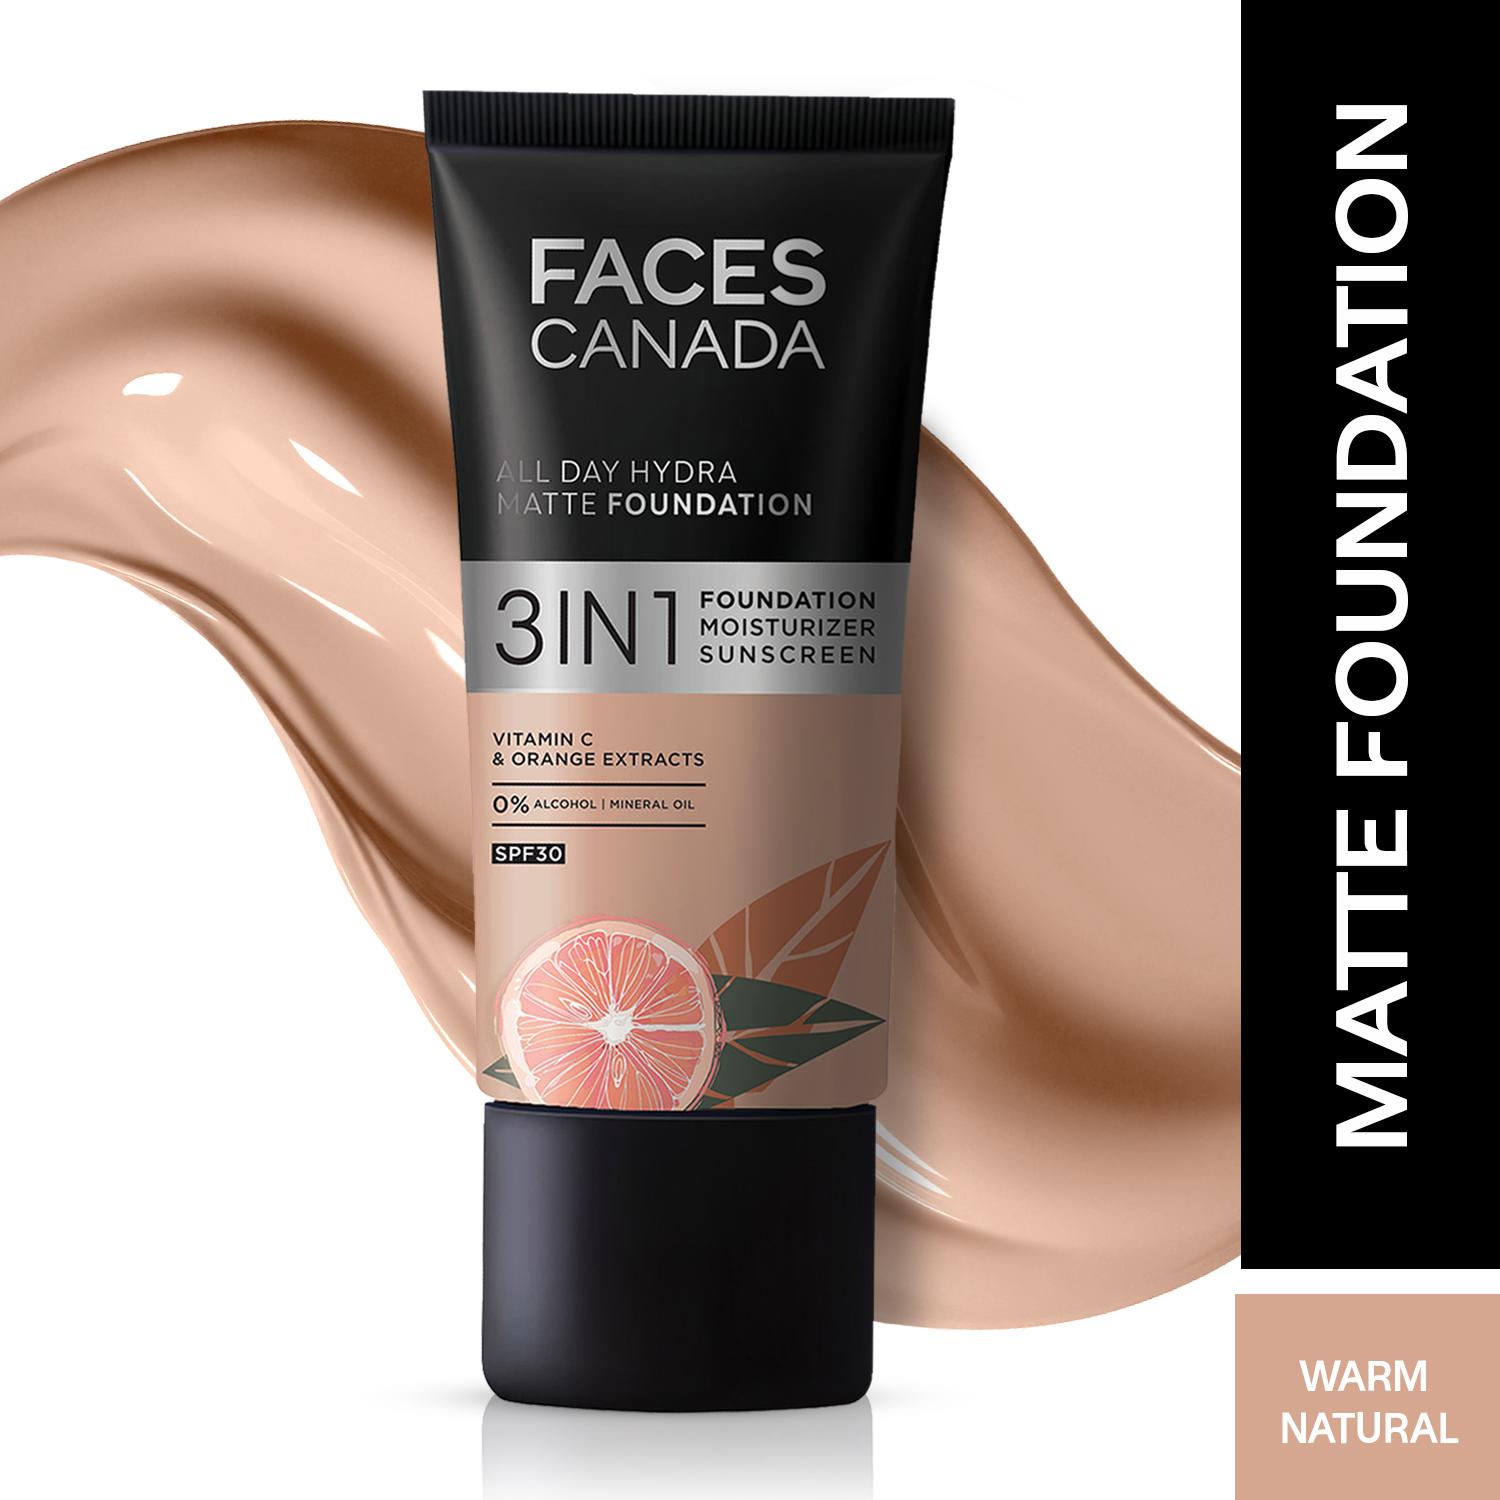 Faces Canada | Faces Canada 3in1 All Day Hydra Matte Foundation + Moisturizer + SPF 30 - Warm Natural 021 (25 ml)